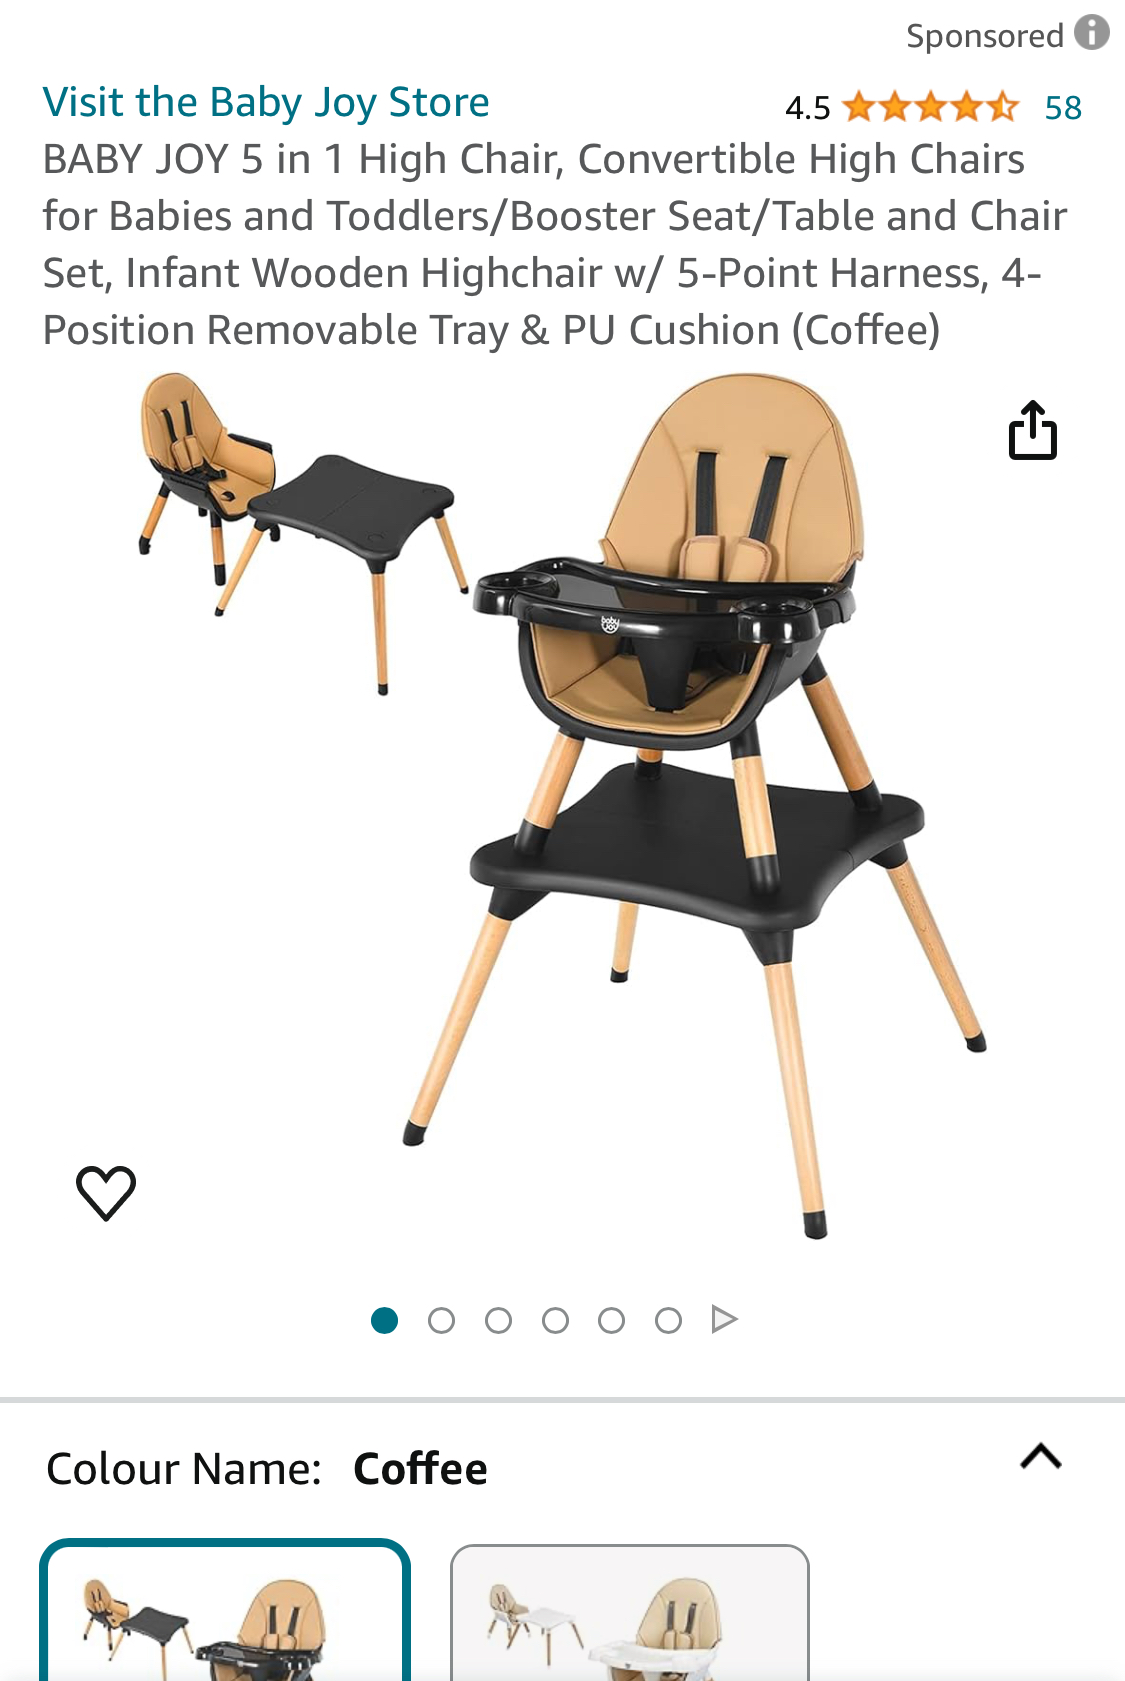 5 in 1 High chair